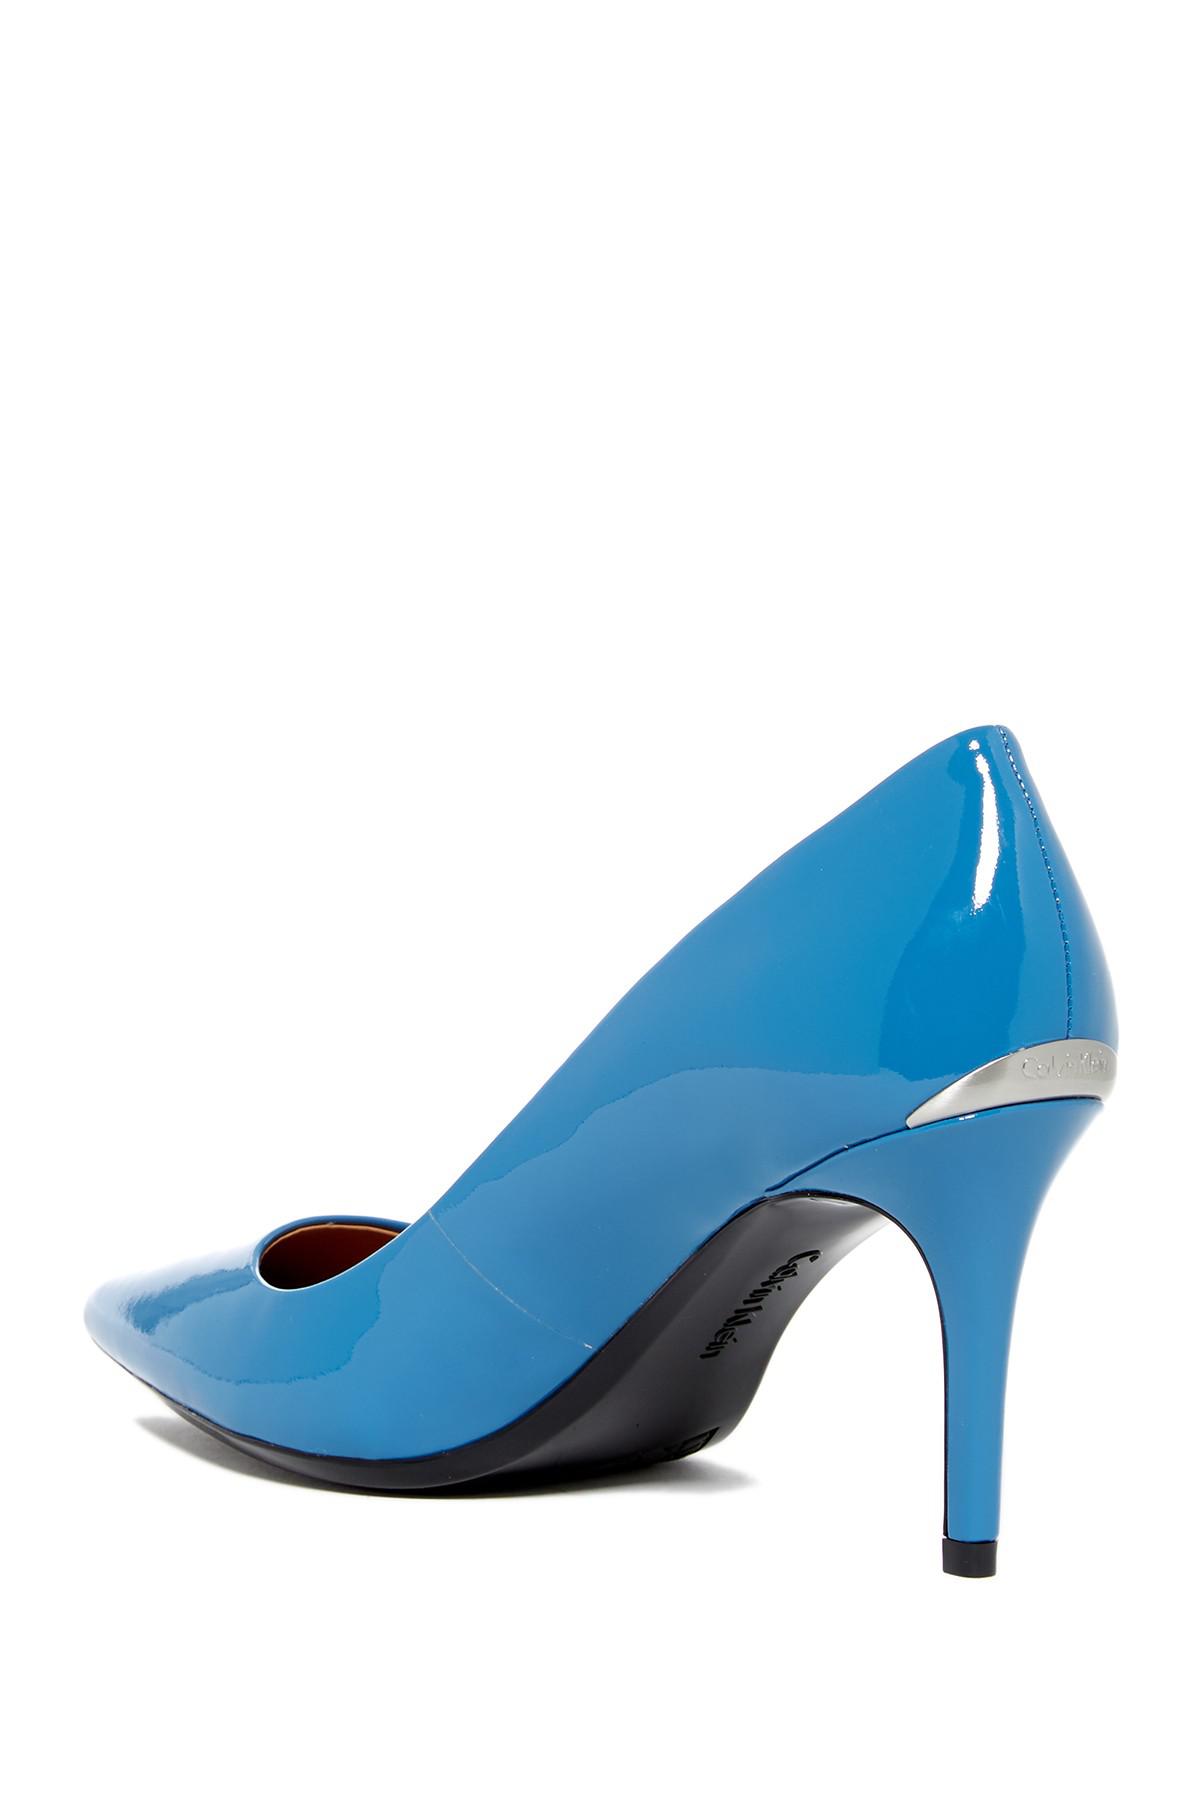 Calvin Klein Gayle Patent Leather Pointed Toe Pump in Blue | Lyst